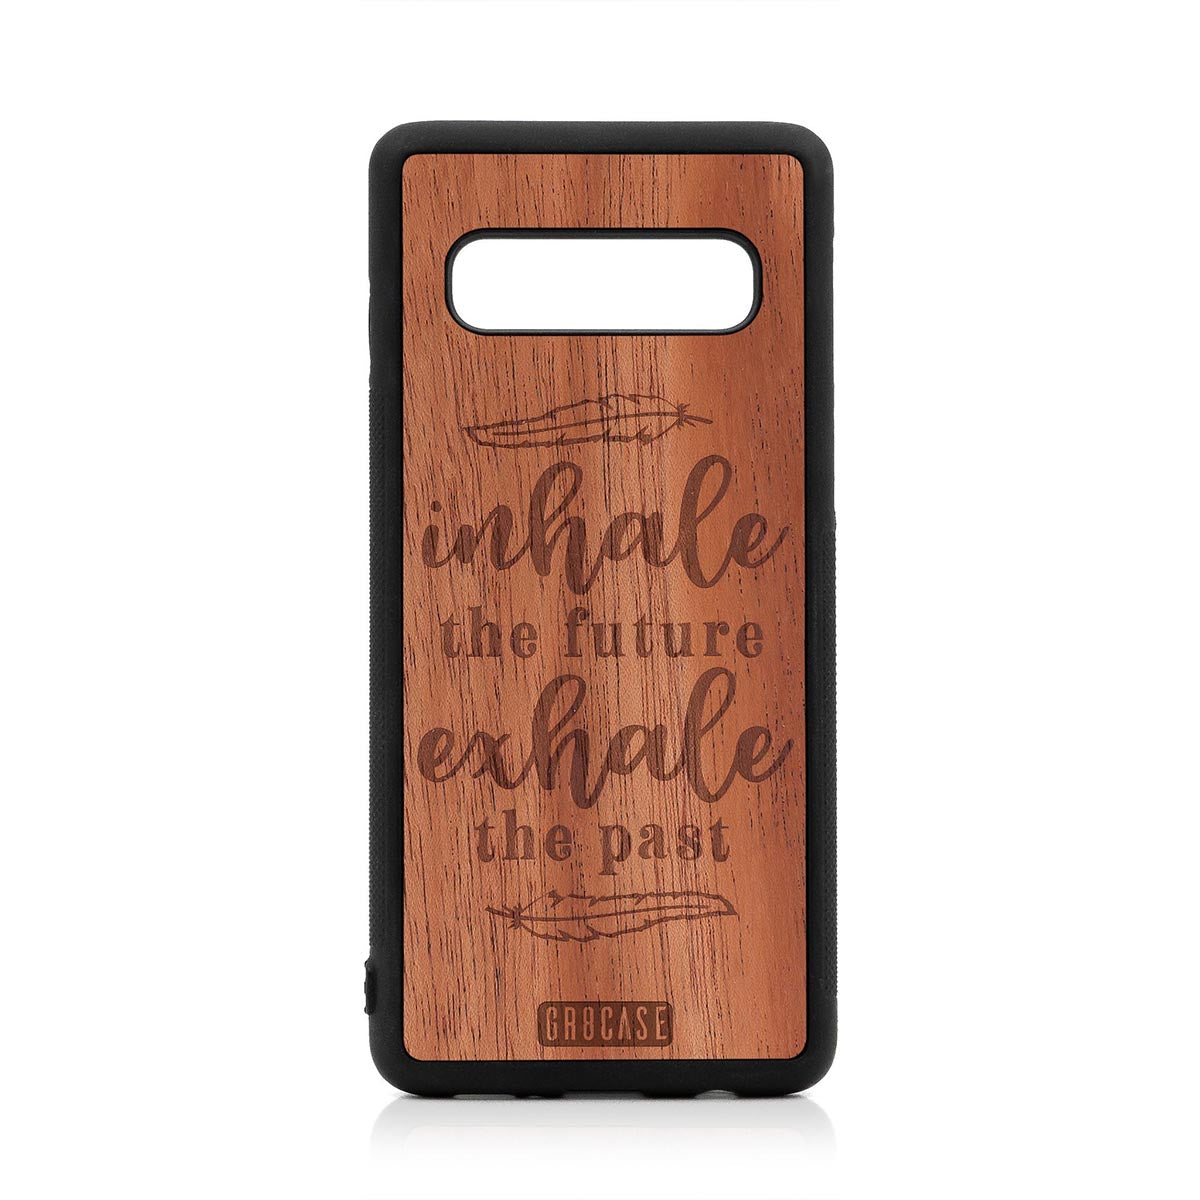 Inhale Future Exhale The Past Design Wood Case For Samsung Galaxy S10 by GR8CASE